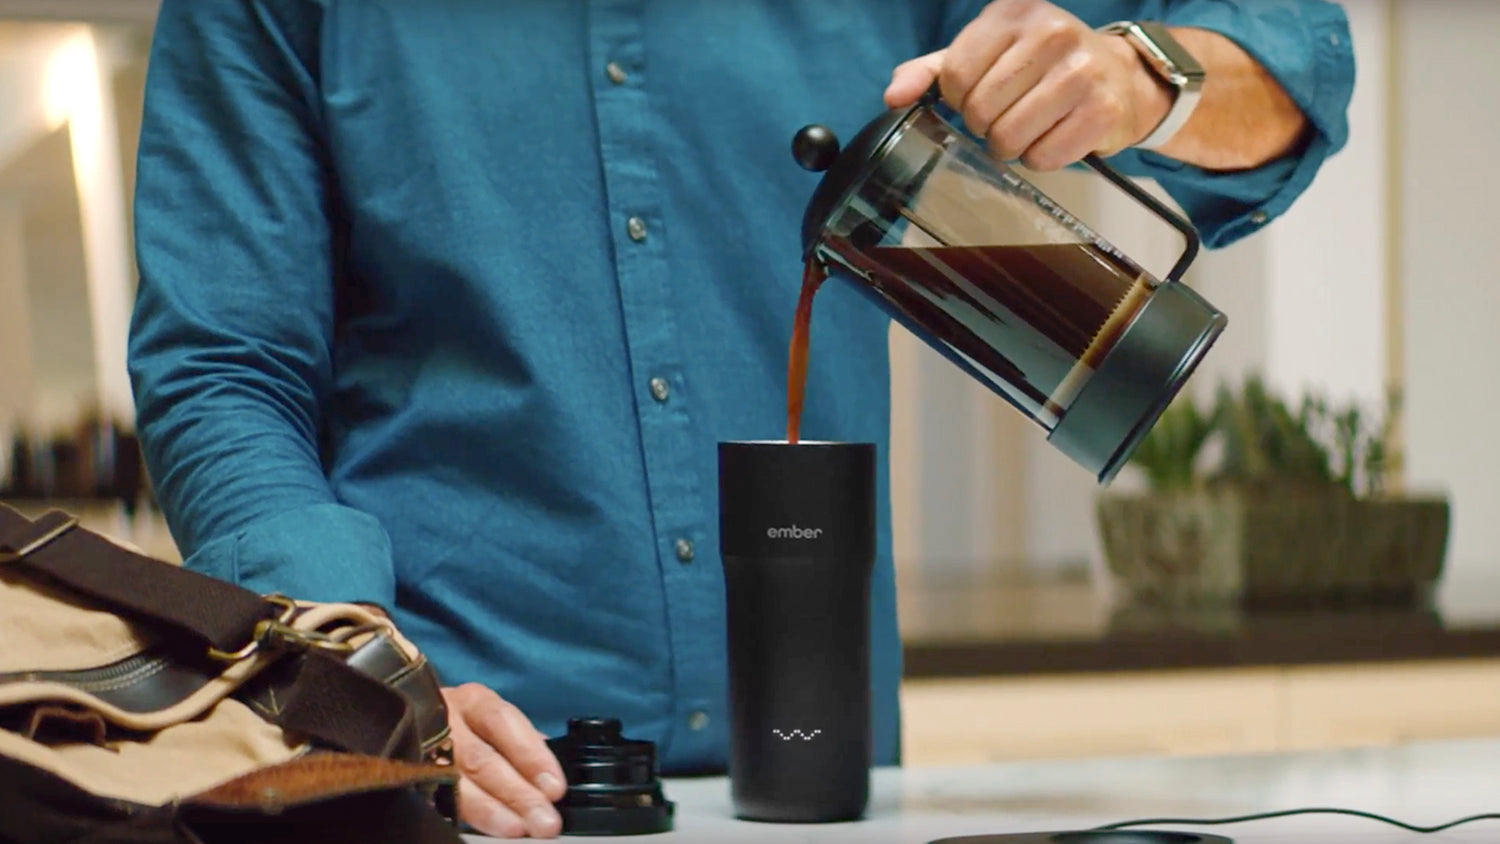 Ember Travel Mug2 - The Smarter Way To Drink In The Office Or Outdoors